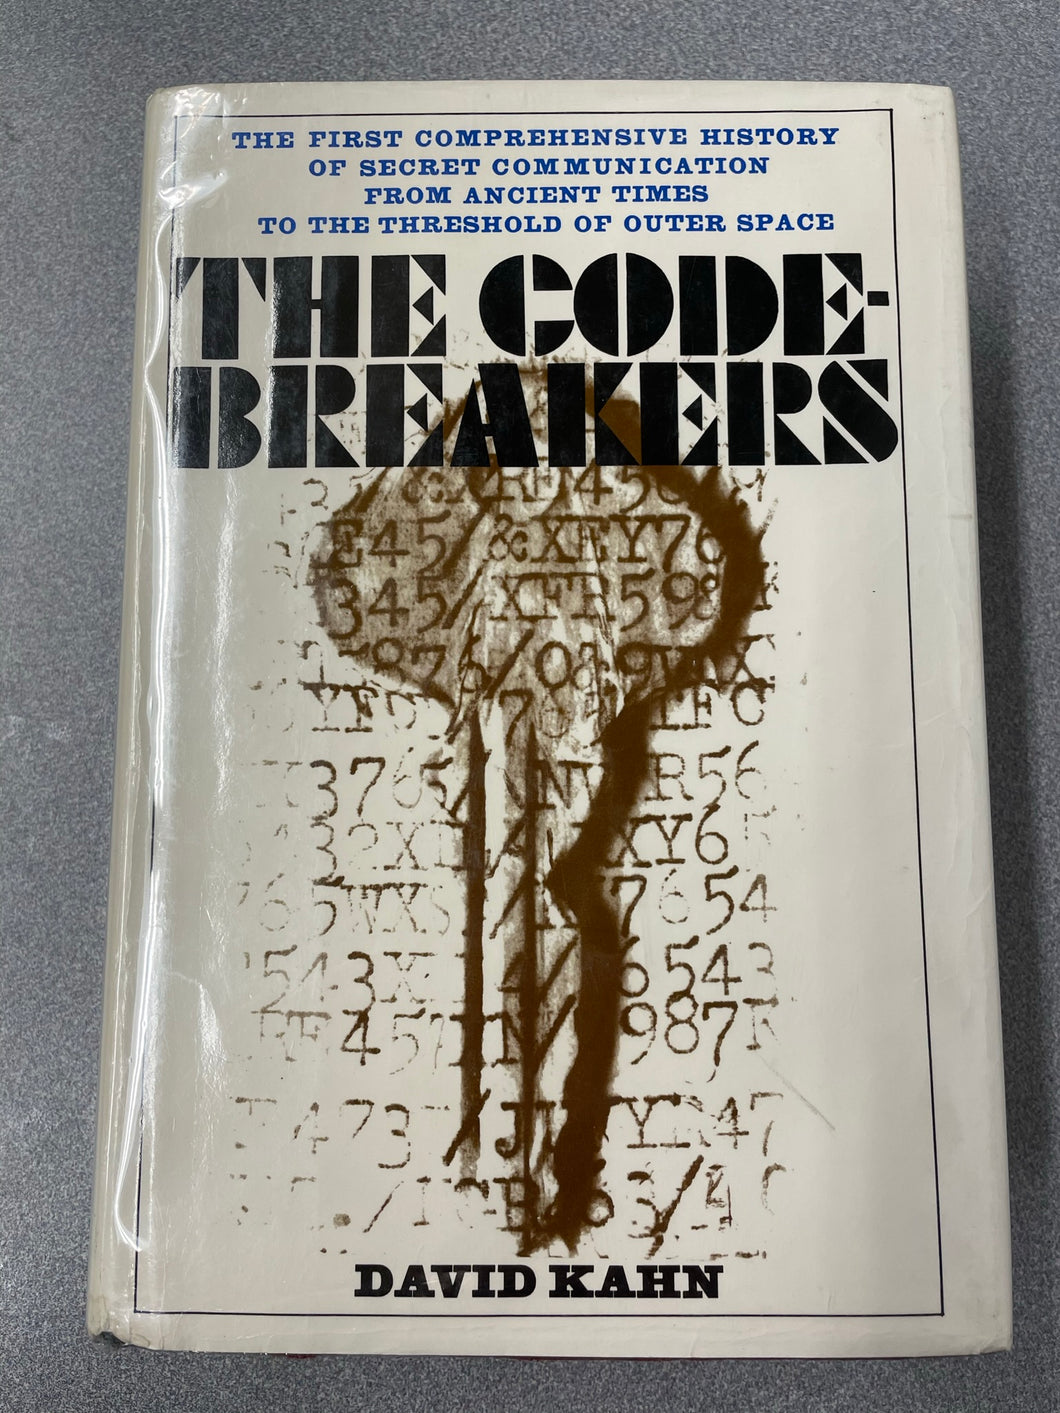 The Codebreakers: The First Comprehensive History of Secret Communication From Ancient Times to the Threshold of Outer Space, Kahn, David [1967] TS 2/23